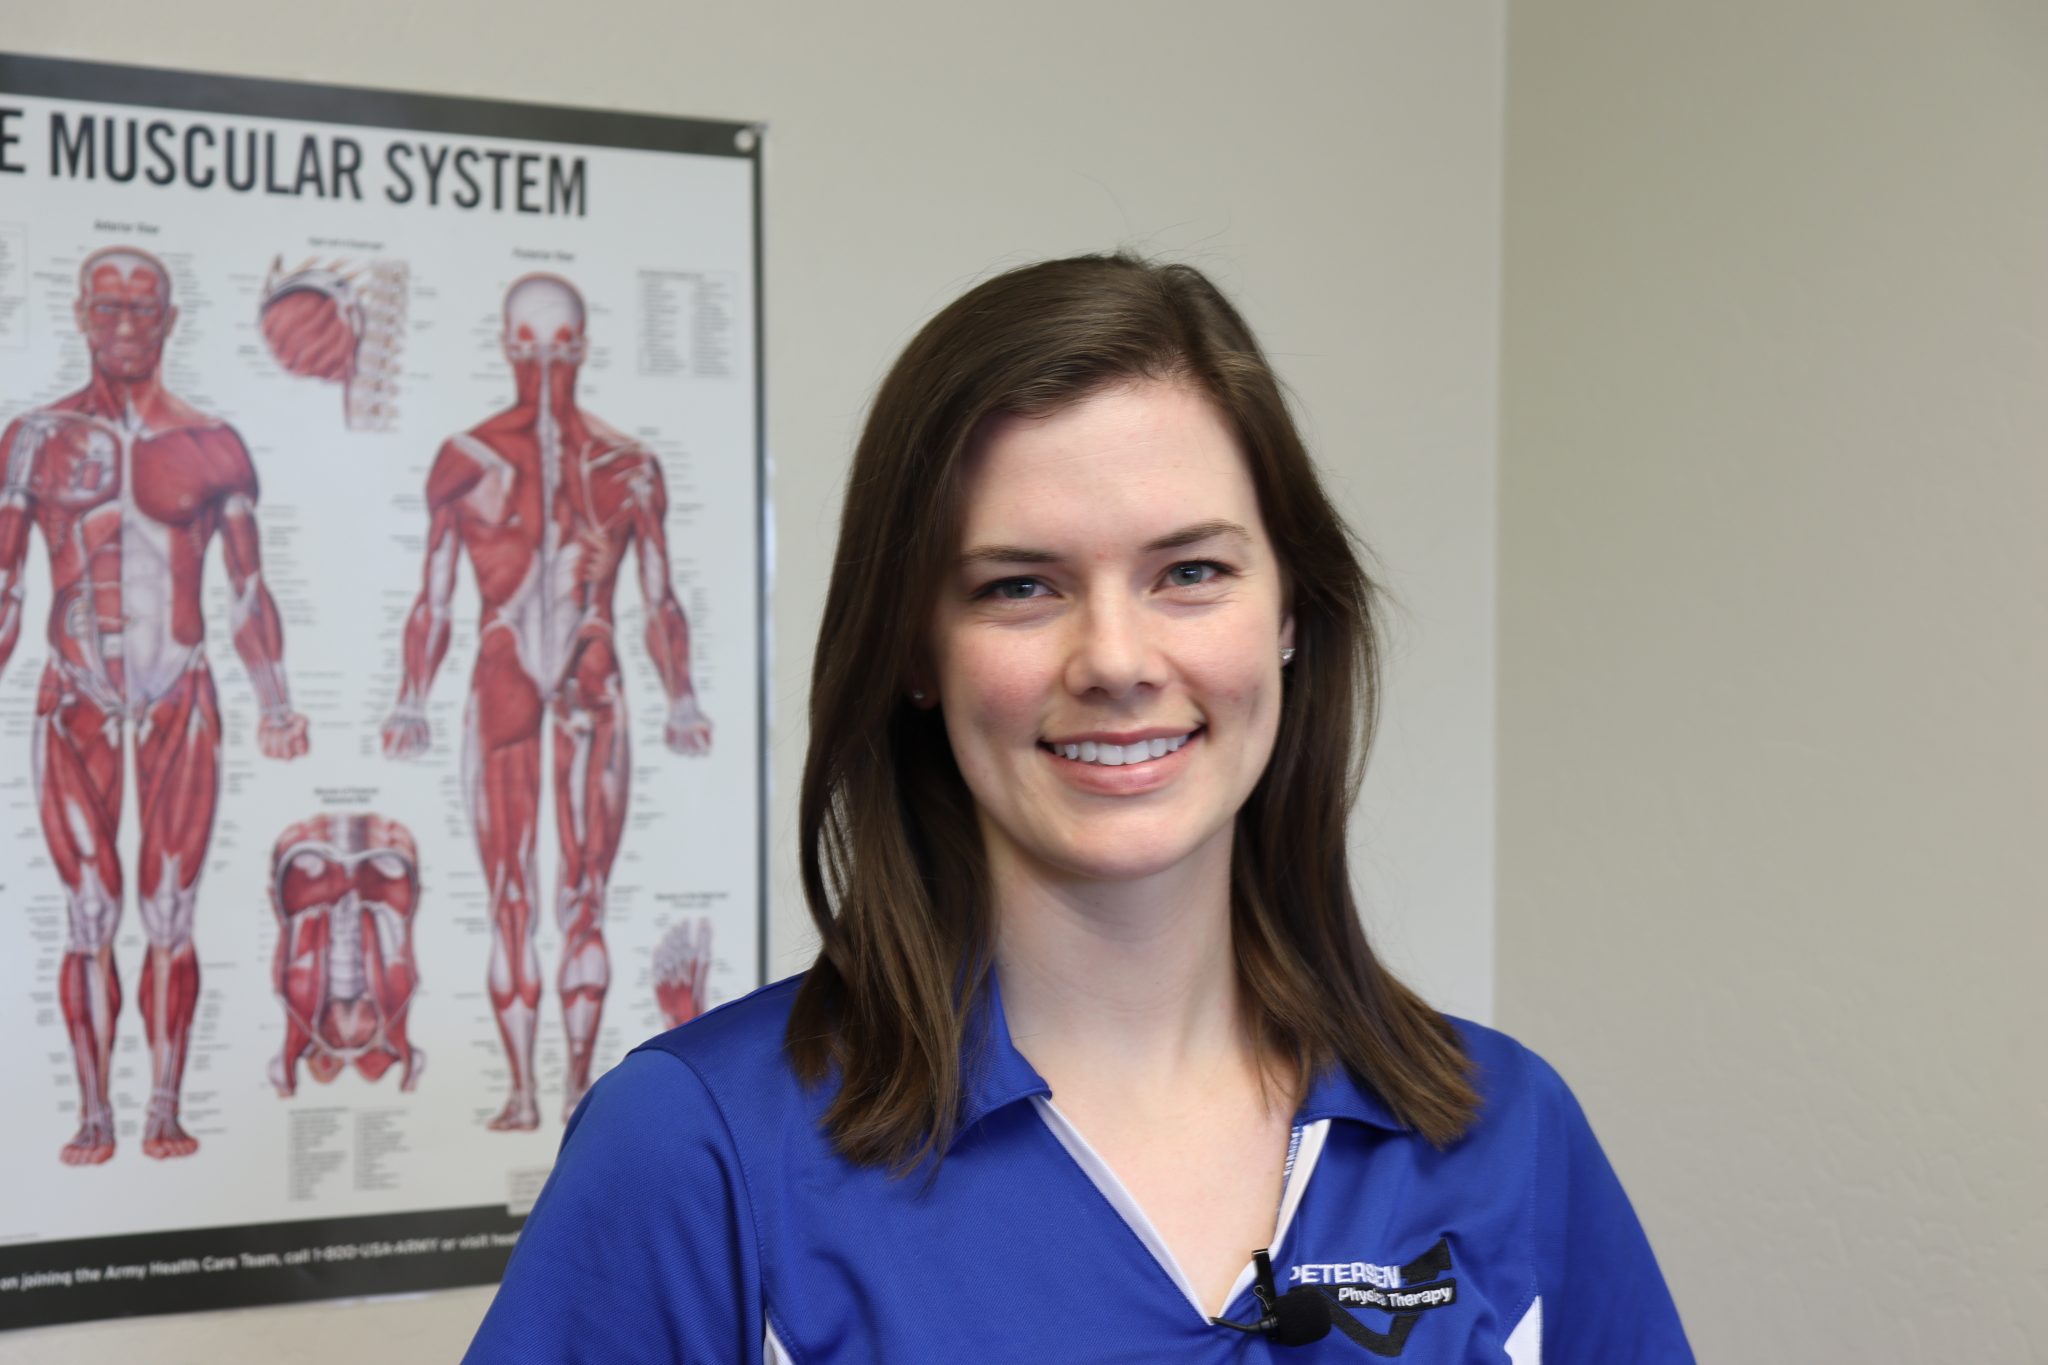 Jennifer Engelbert is one of the physical therapists in our Tempe physical therapy office